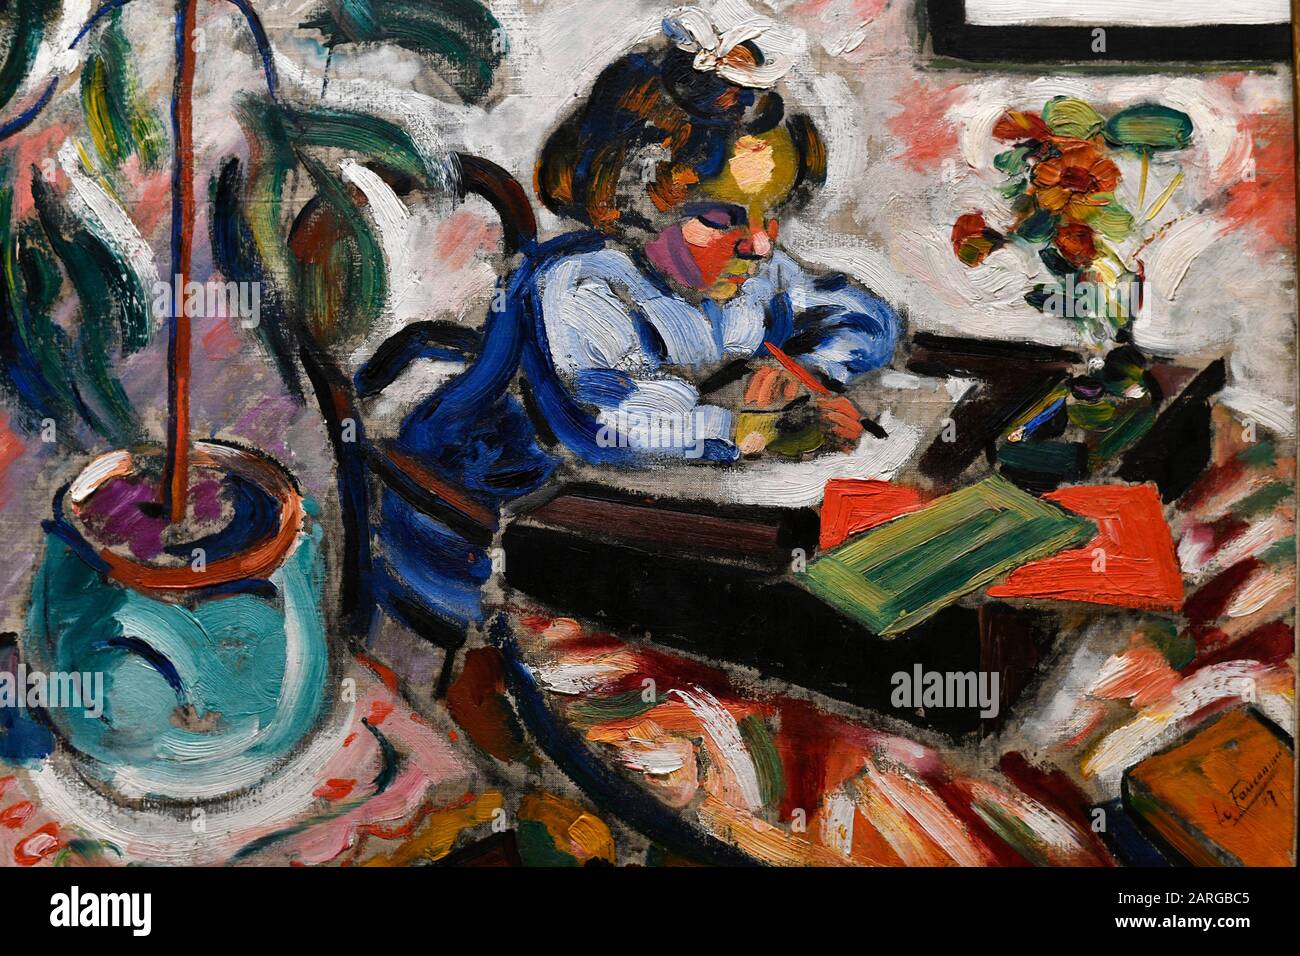 Little Schoogirl, 1907, oil on canvas,painting by Henri Le Fauconnier (1881-1946), State Hermitage museum,St Petersburg Russia, Europe. Stock Photo